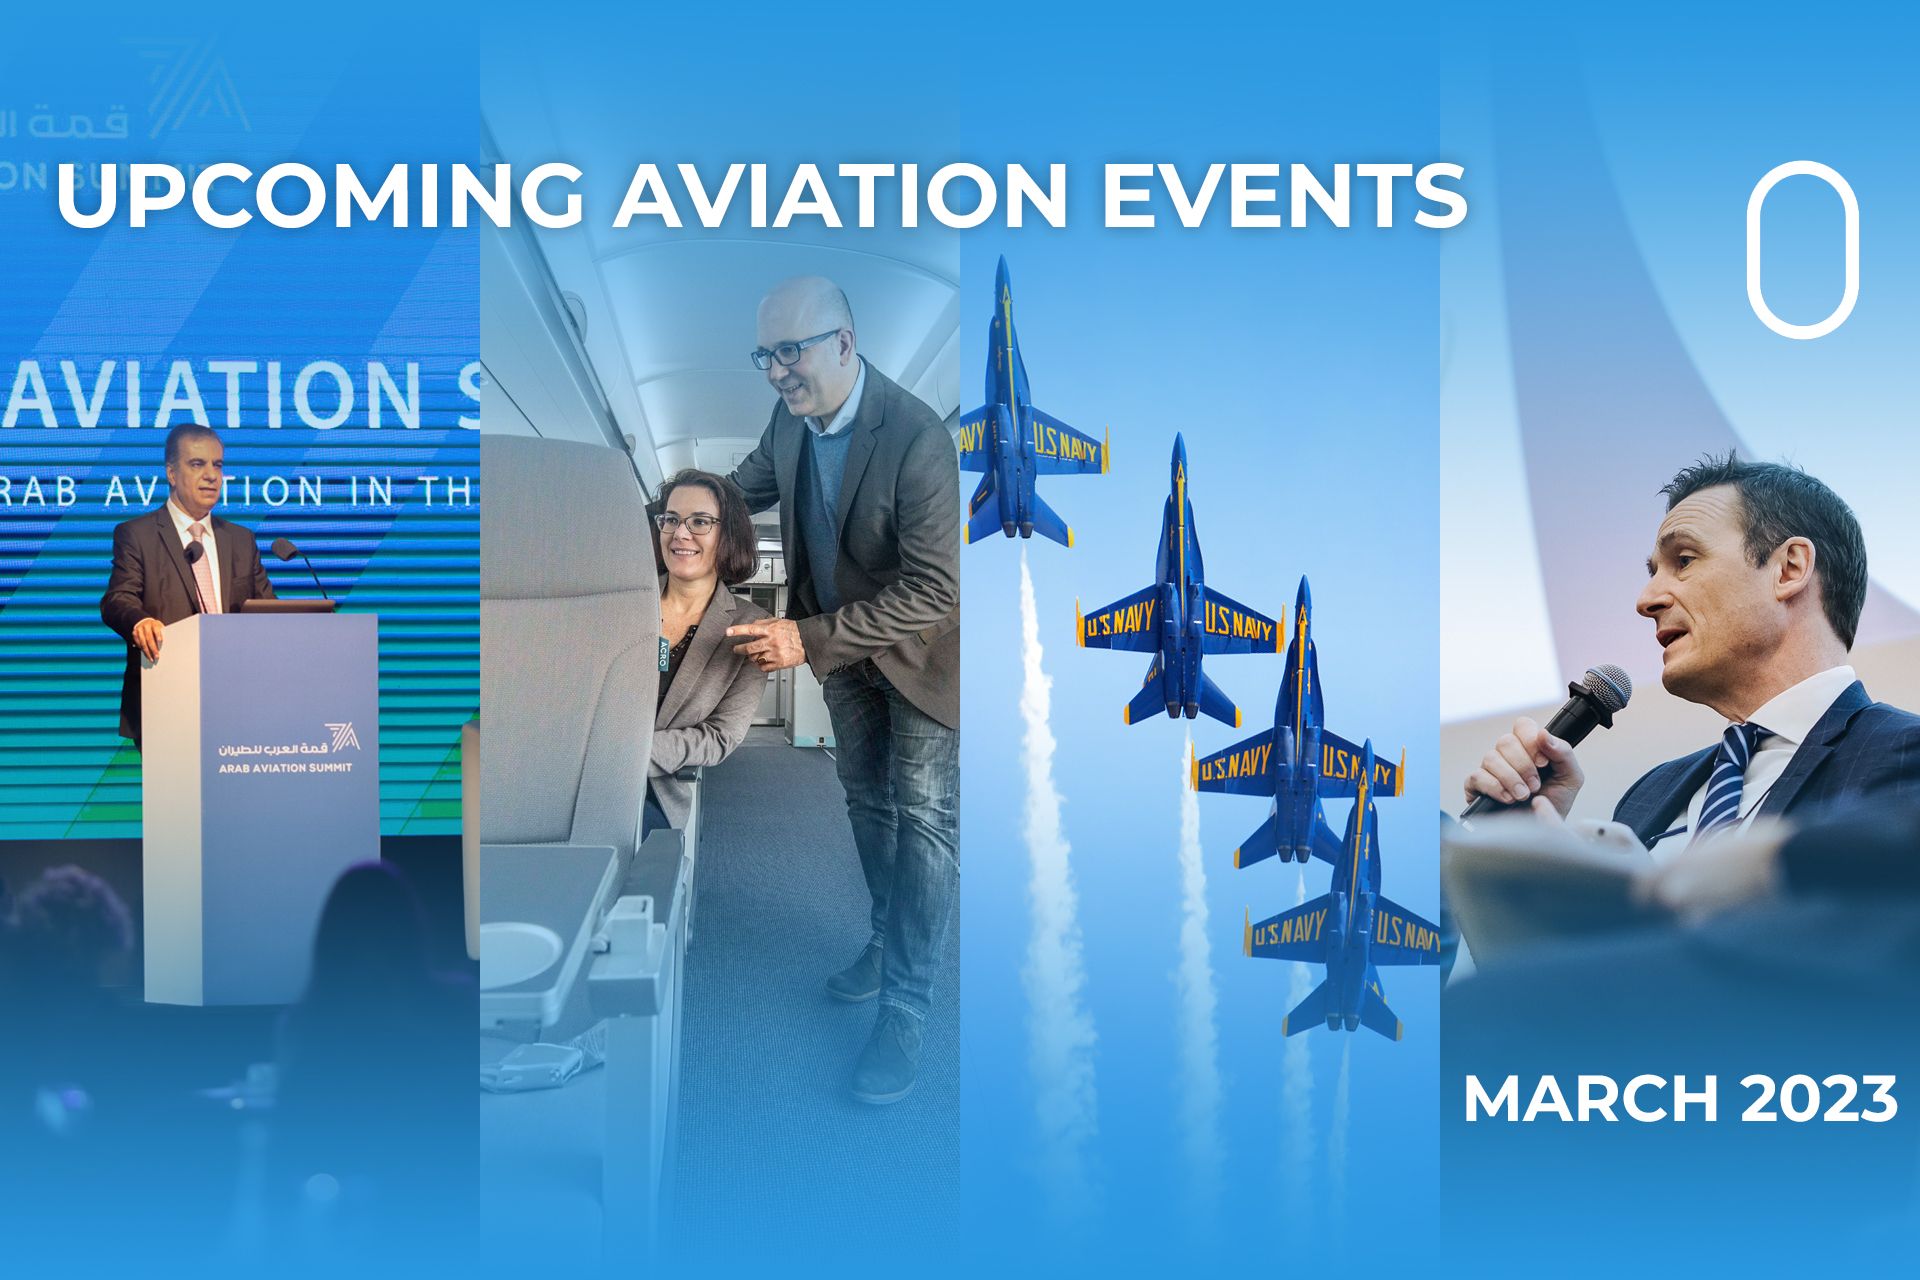 4 Aviation Events To Look Forward to In March